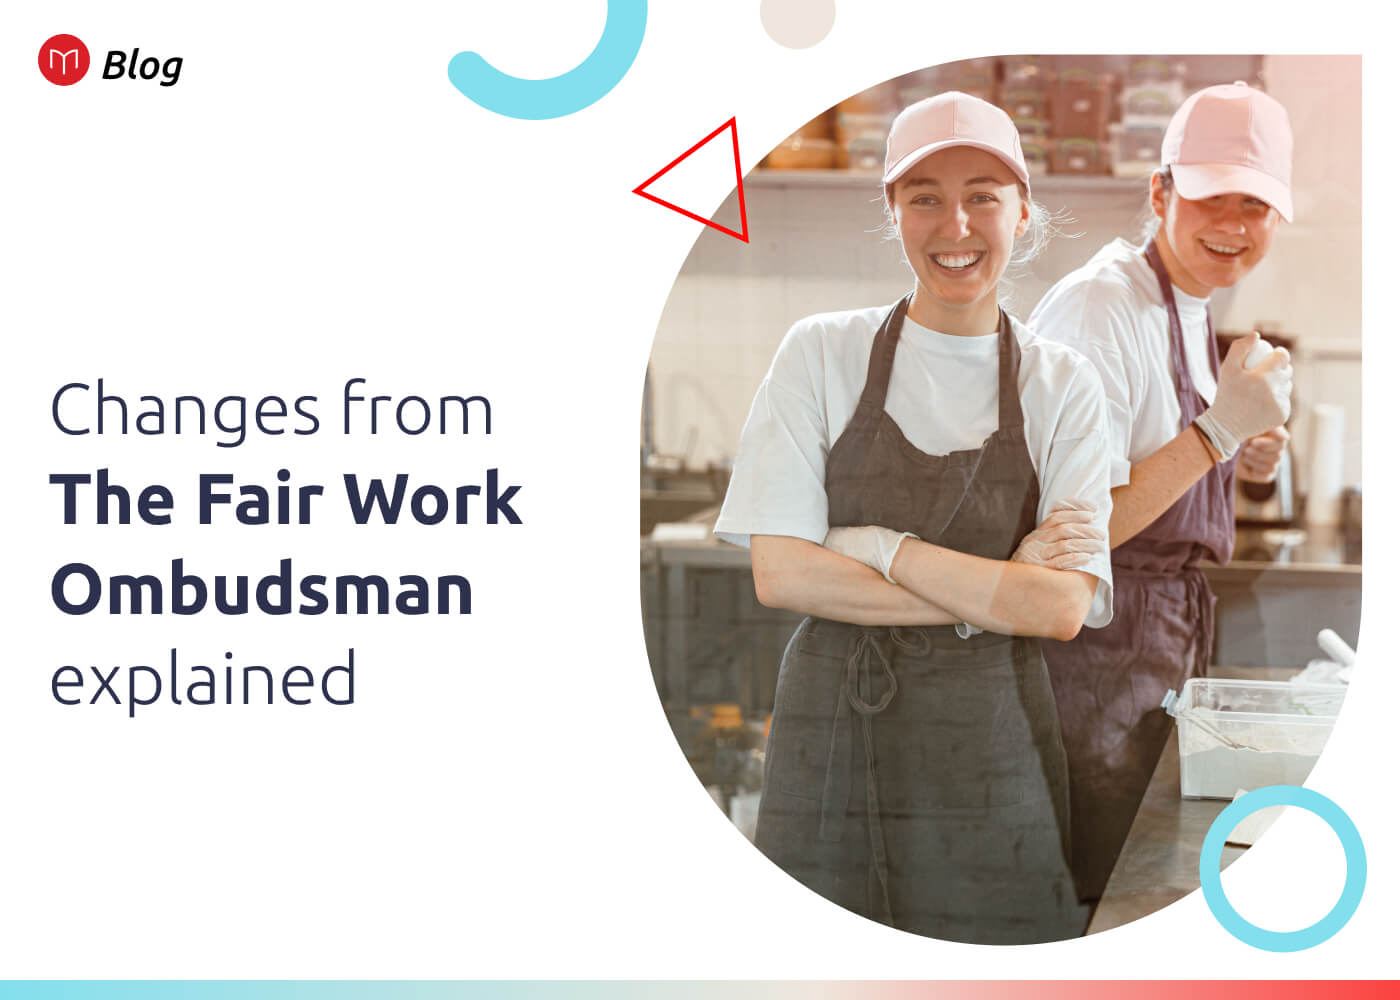 The Fair Work Ombudsman changes explained